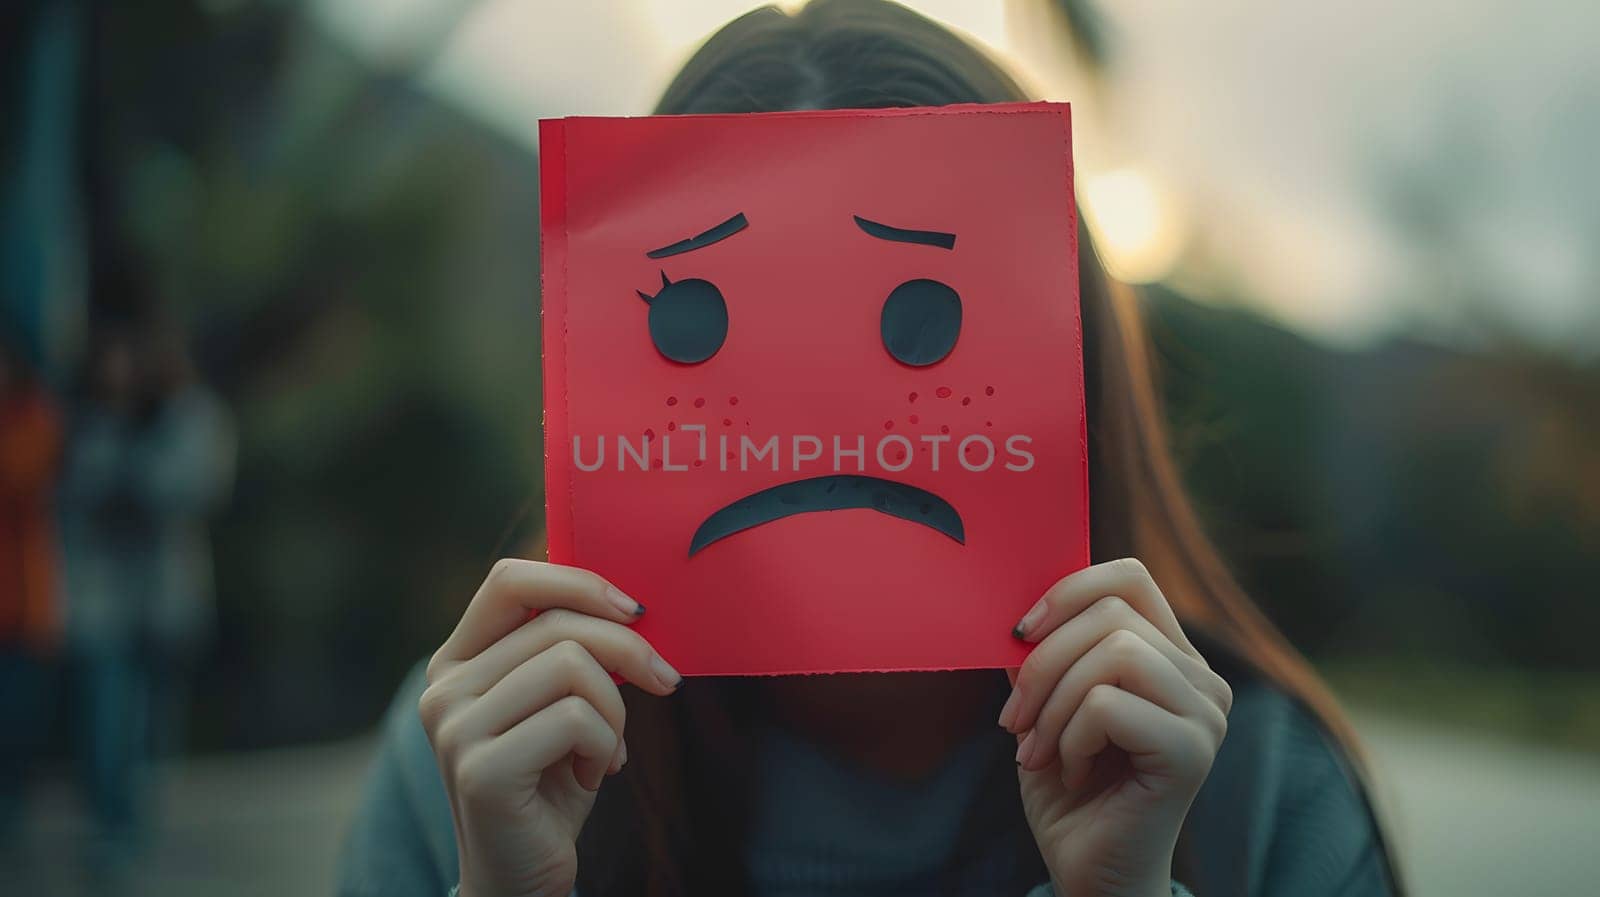 A woman is using her hand to hold up a red paper with a sad face drawing on it in front of her head. This gesture shows a fictional character expressing sadness in an artistic way